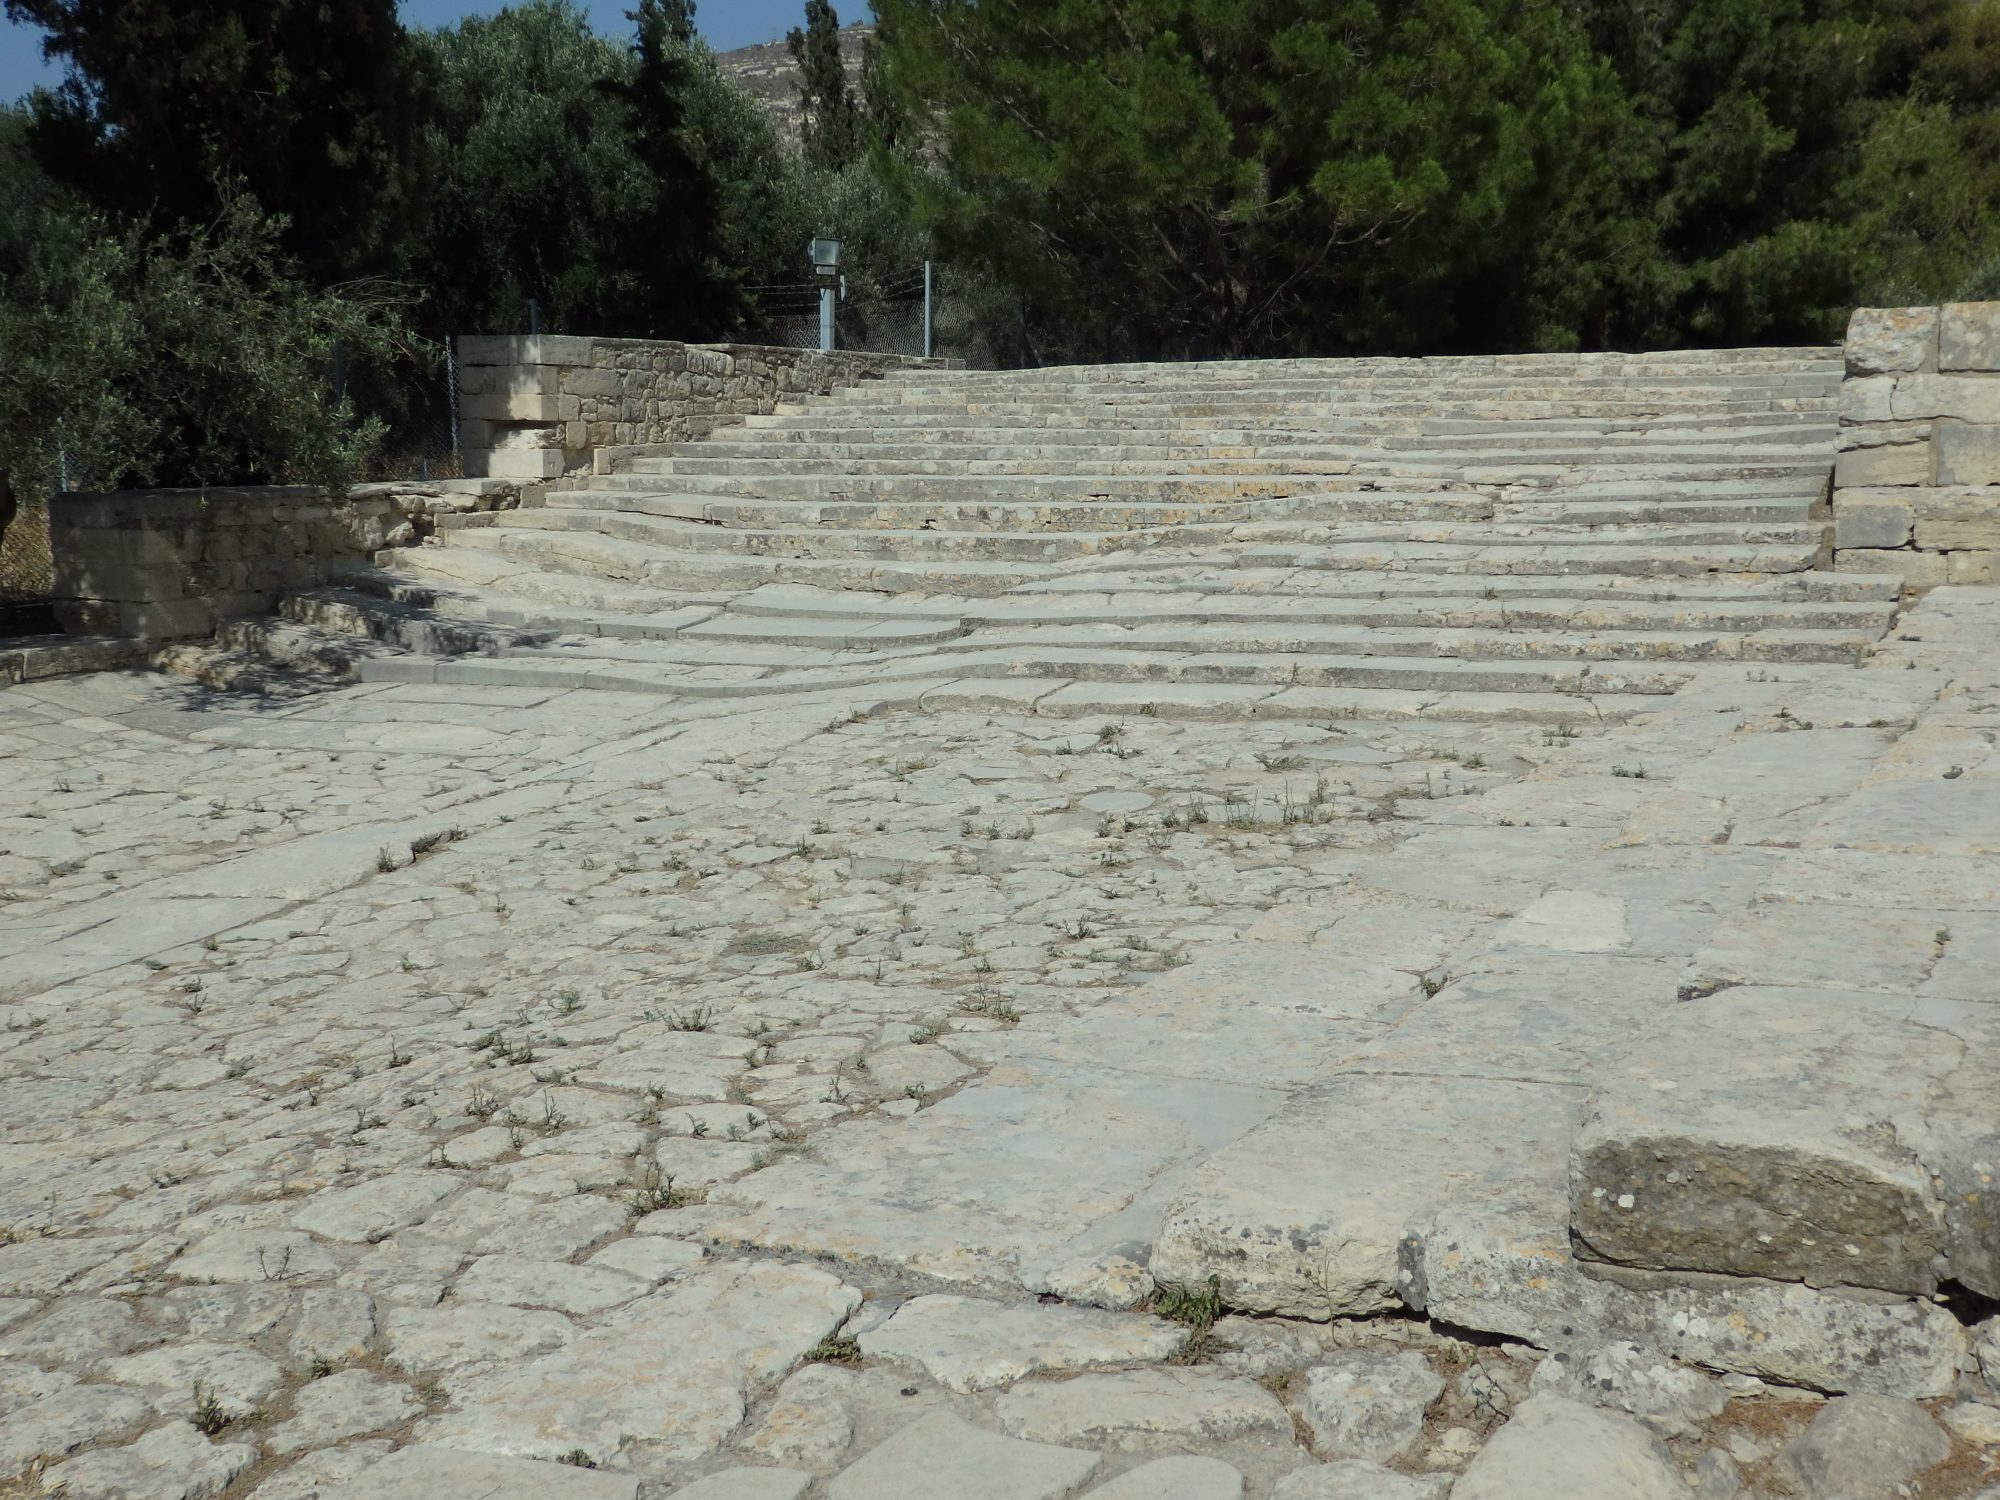 This area at Knossos may have been used for ceremonies.